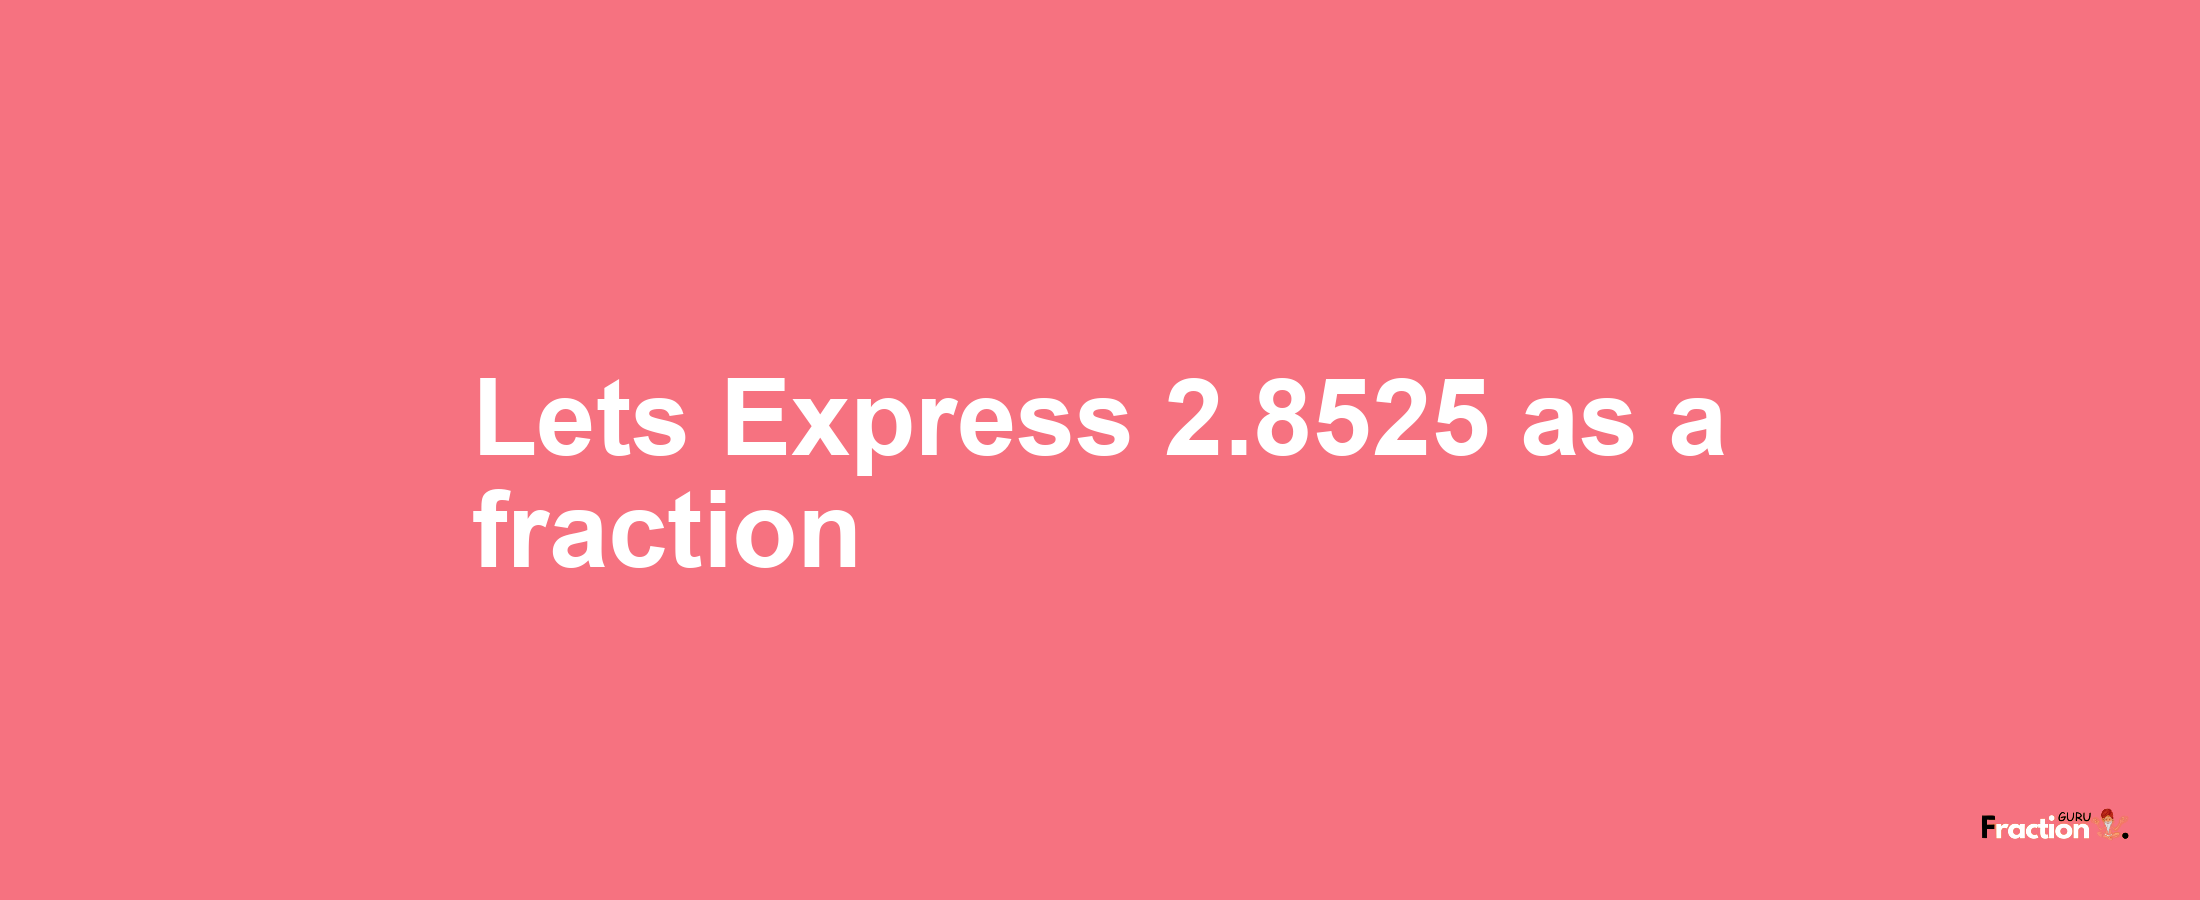 Lets Express 2.8525 as afraction